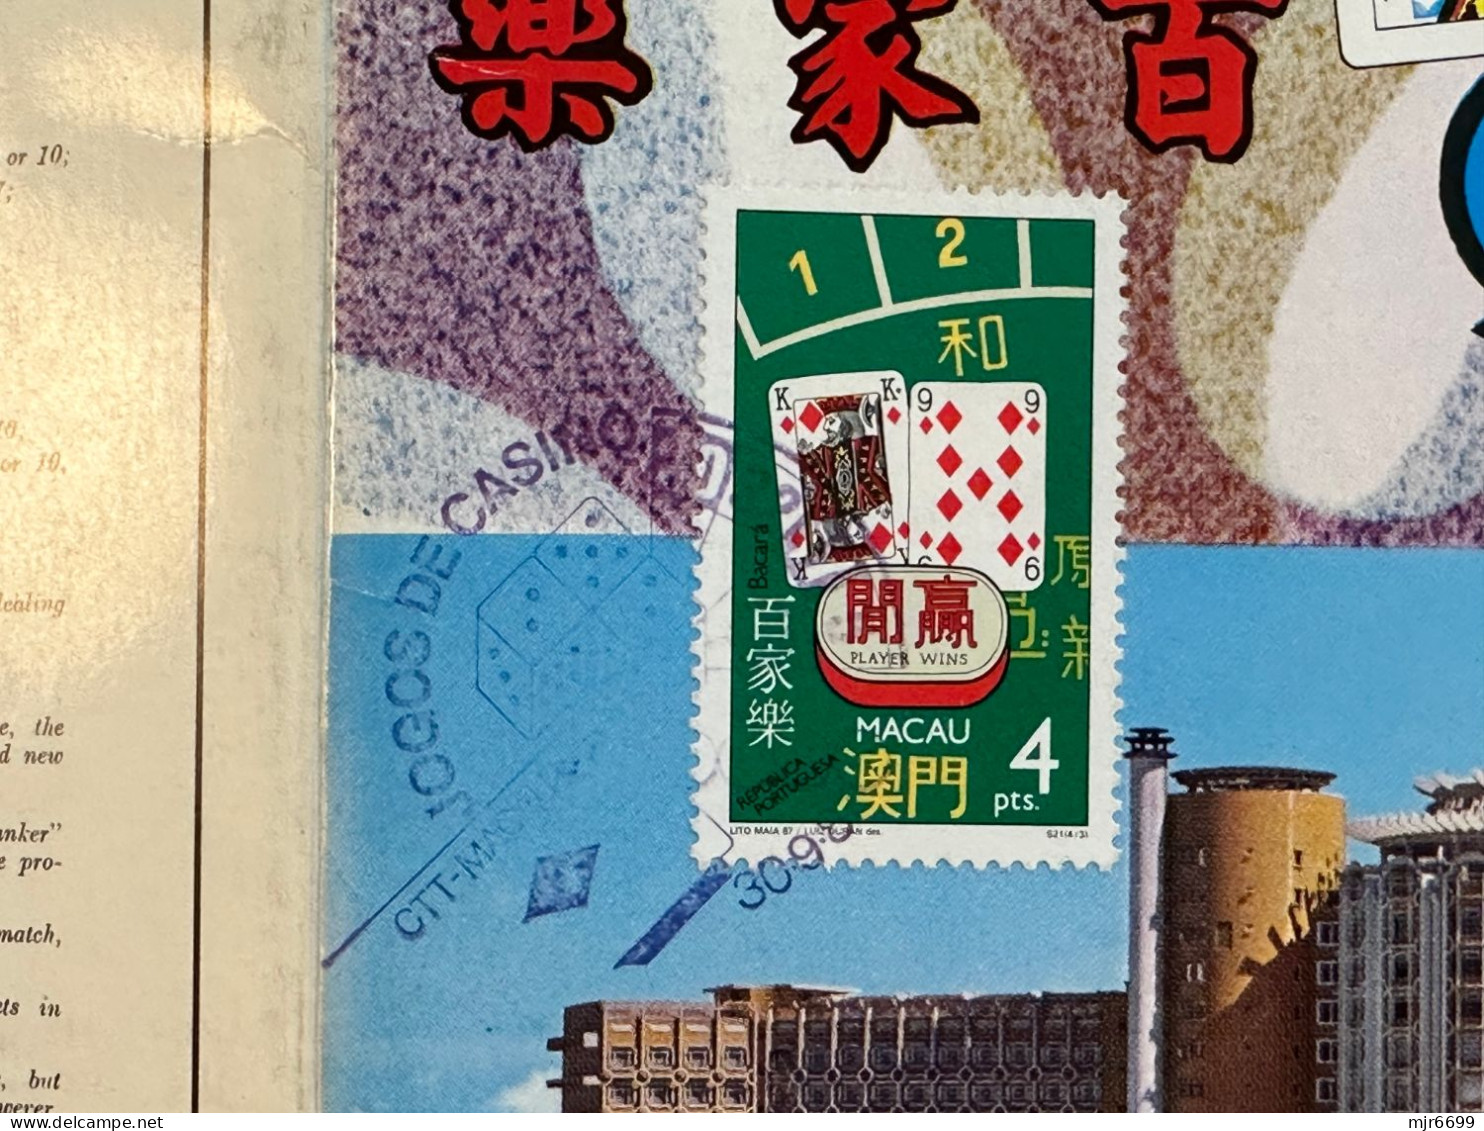 MACAU 1987 CASINO GAMES STAMPS  USED IN BACCARAT OFFICIAL RULES CHART & FANTAN REGISTER PAPER CARD - Oblitérés